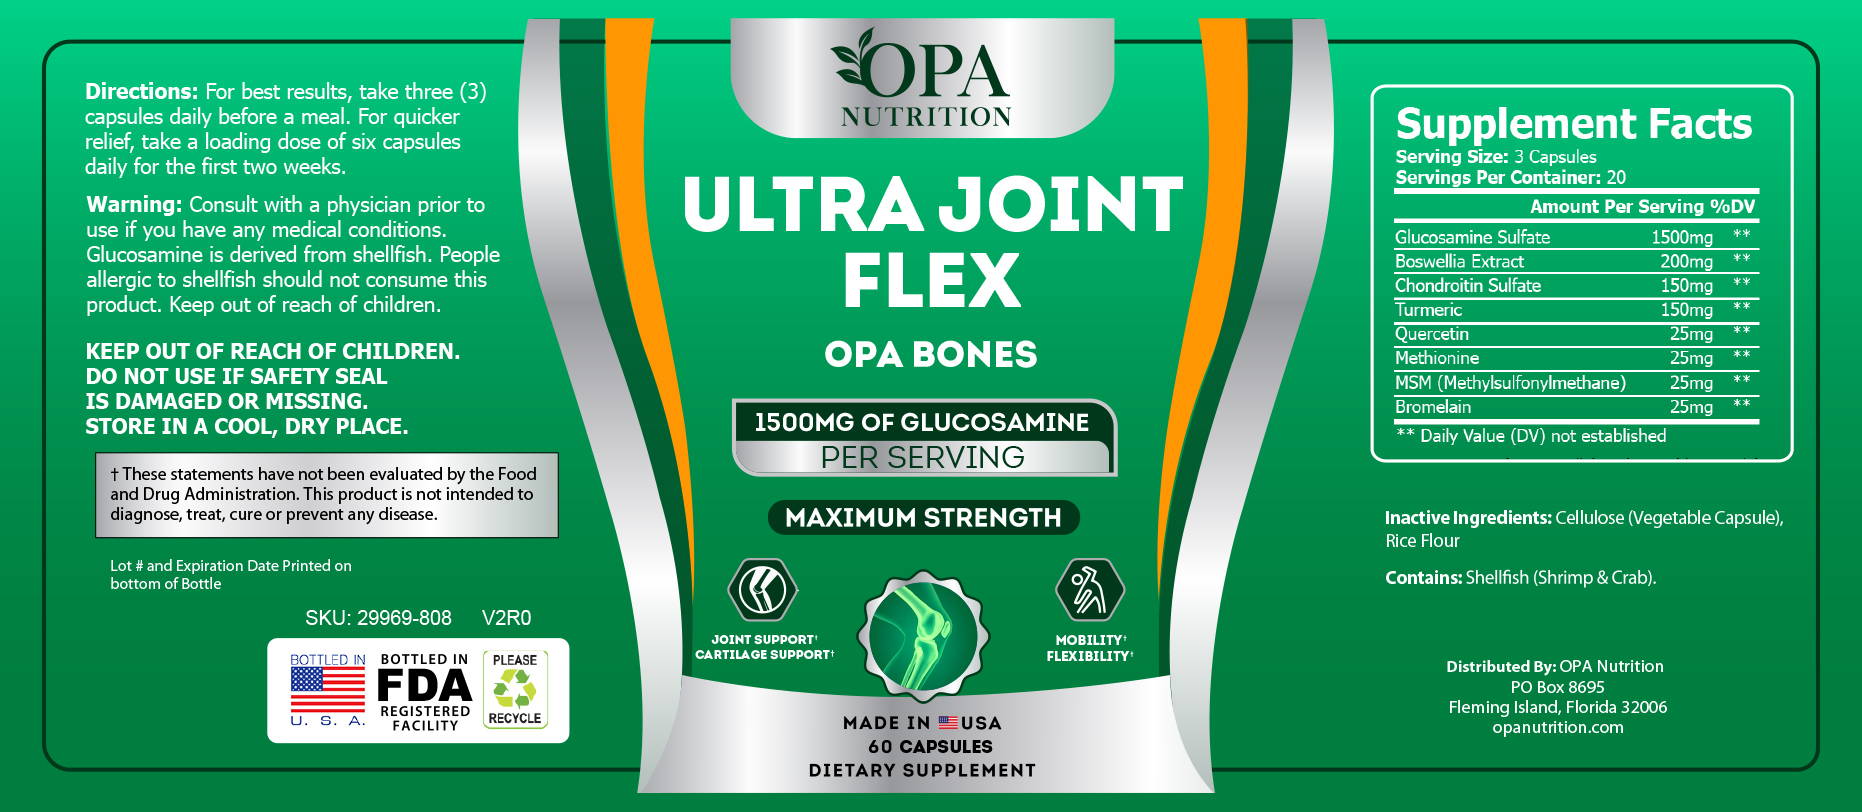 OPA NUTRITION GLUCOSAMINE CHONDROITIN MSM AND TURMERIC JOINT SUPPORT LABELS & DIRECTIONS